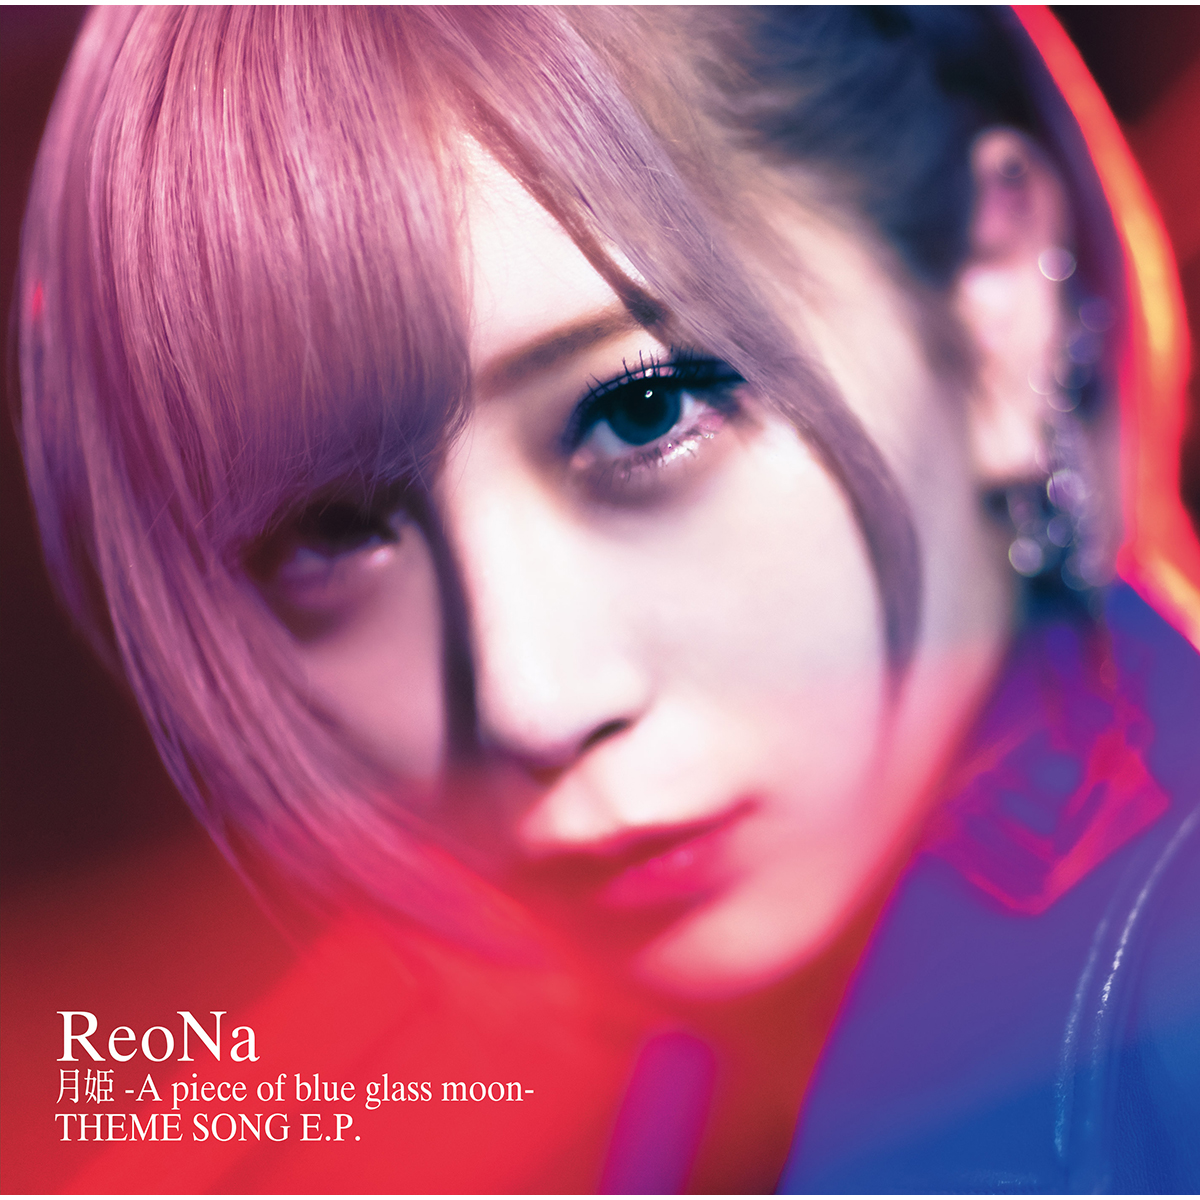 ReoNa、9月1日発売の「月姫 -A piece of blue glass moon- THEME SONG E.P.」発売記念リリースイベント情報を公開！ - 画像一覧（4/9）